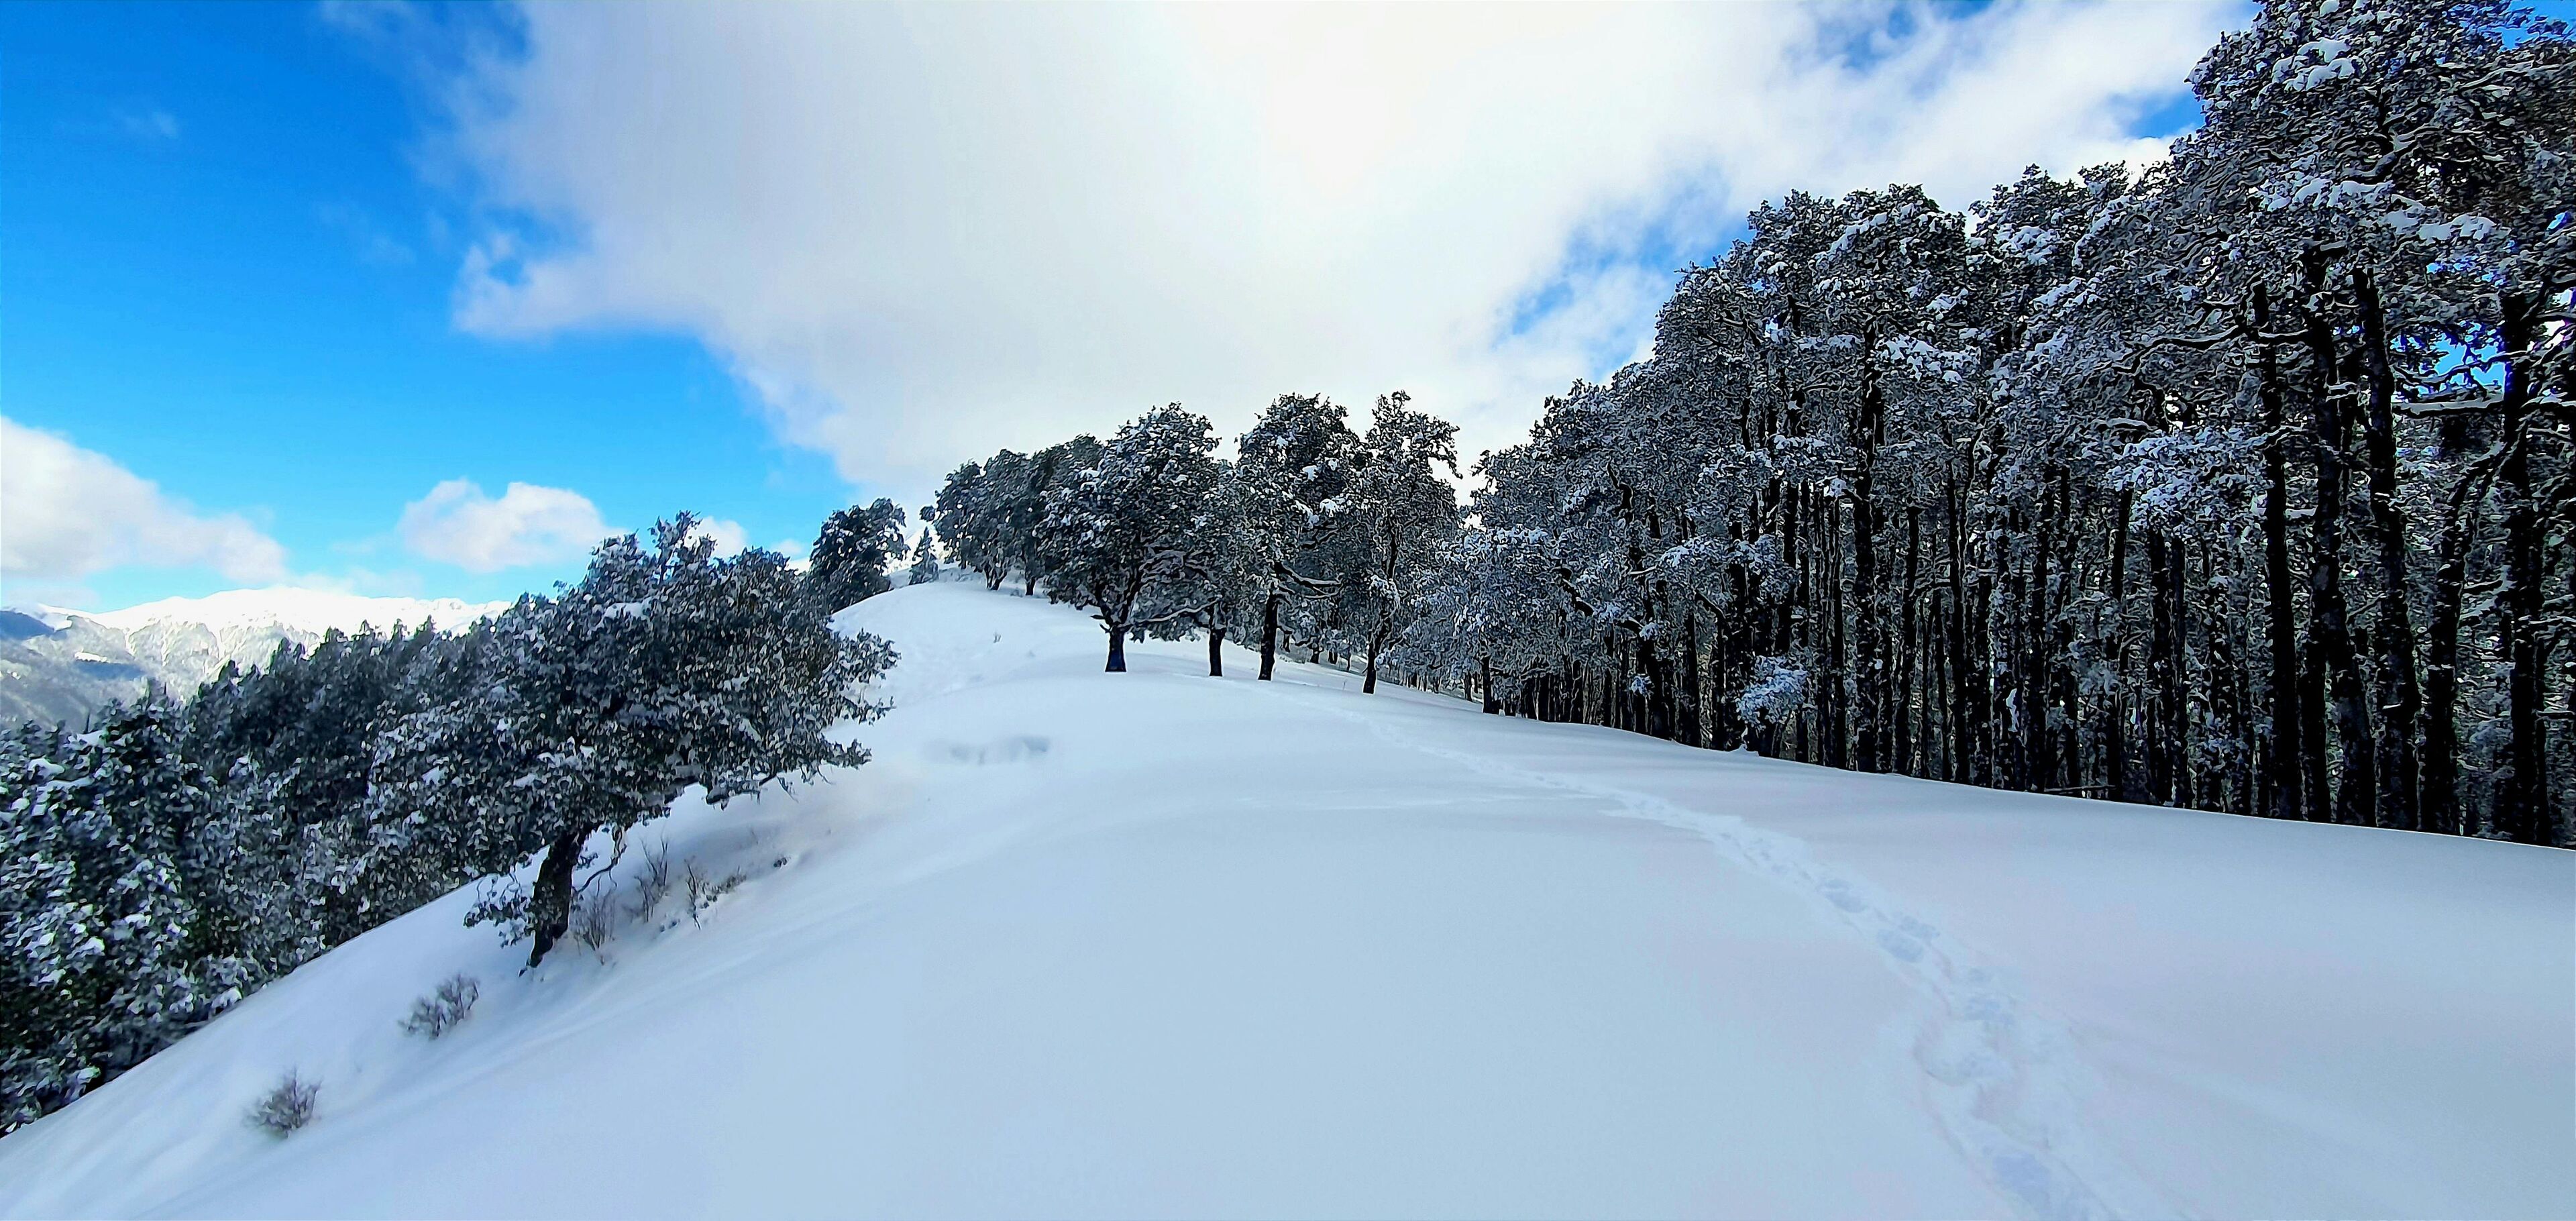 snow covering the pine and oak forest in the jungles of Ali Bedni